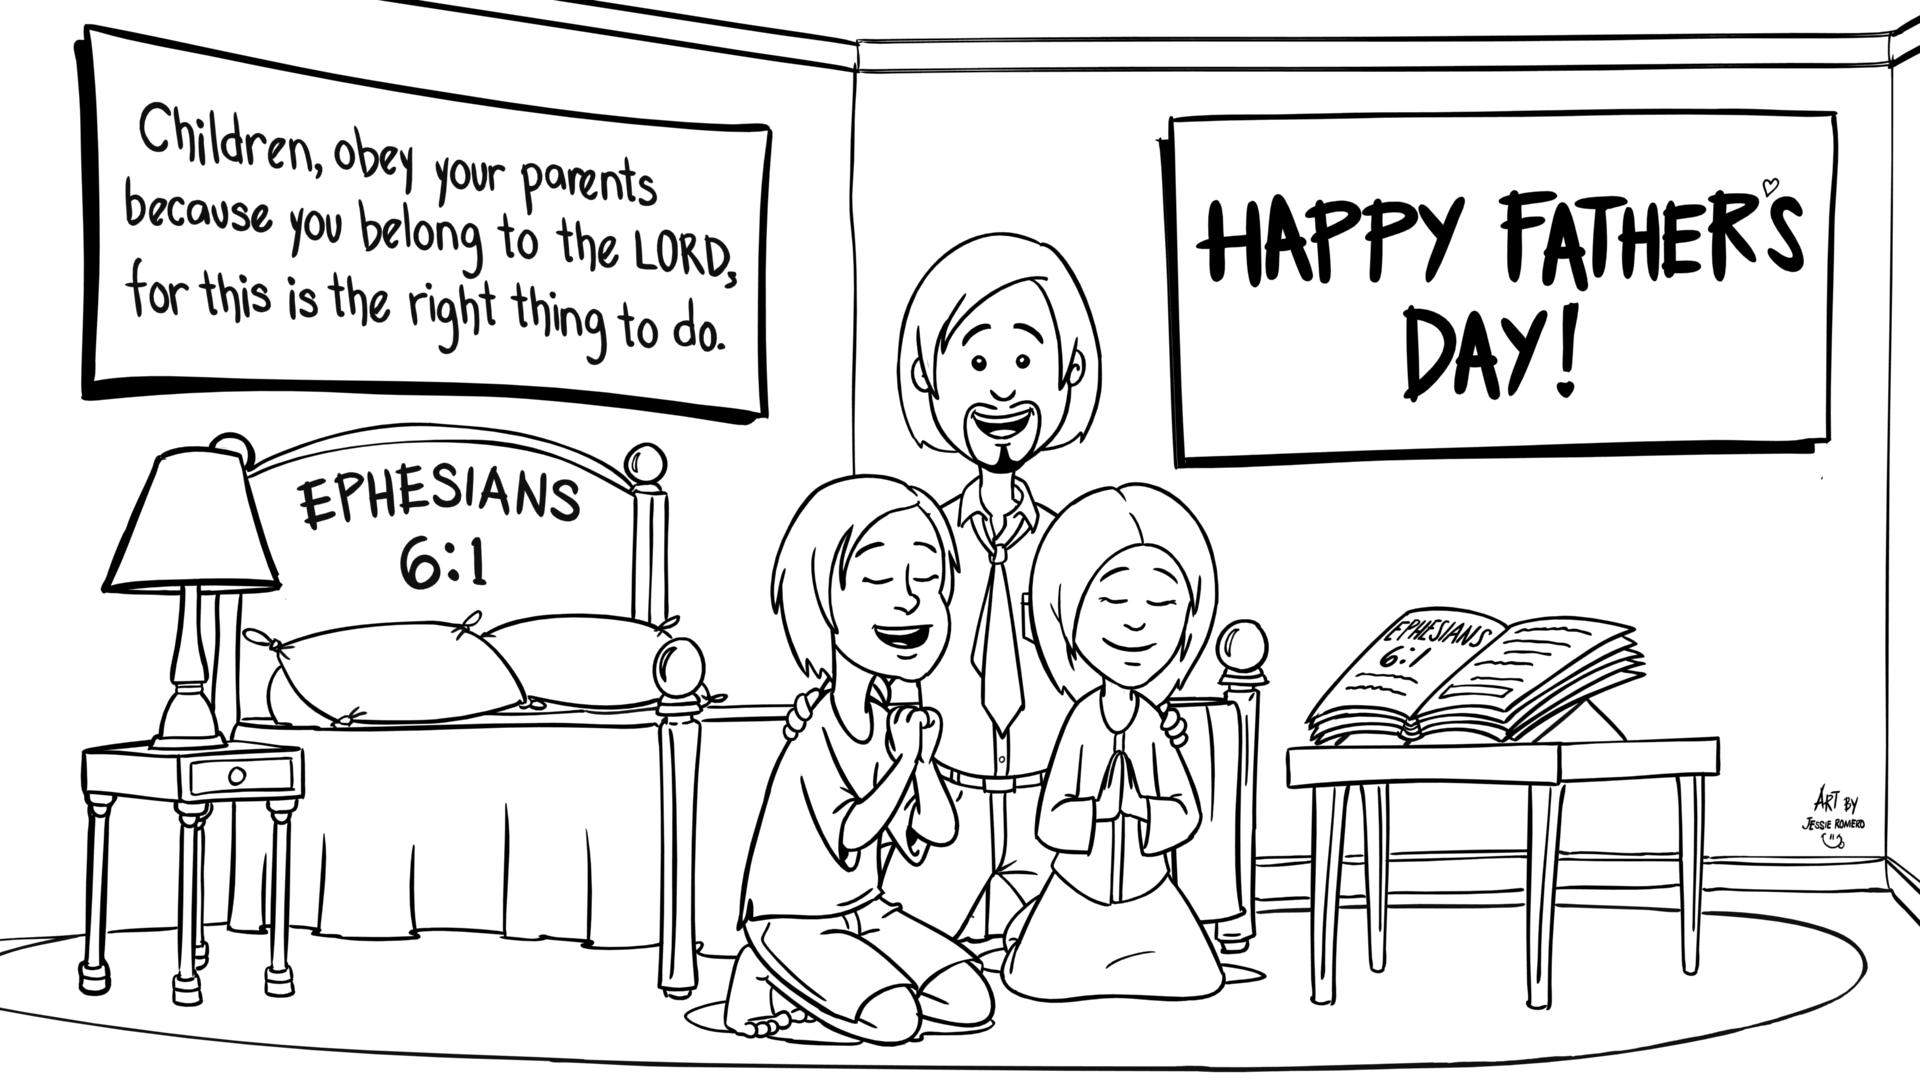 Happy Father's Day! Ephesians chapter 6 verse 1 .jpg